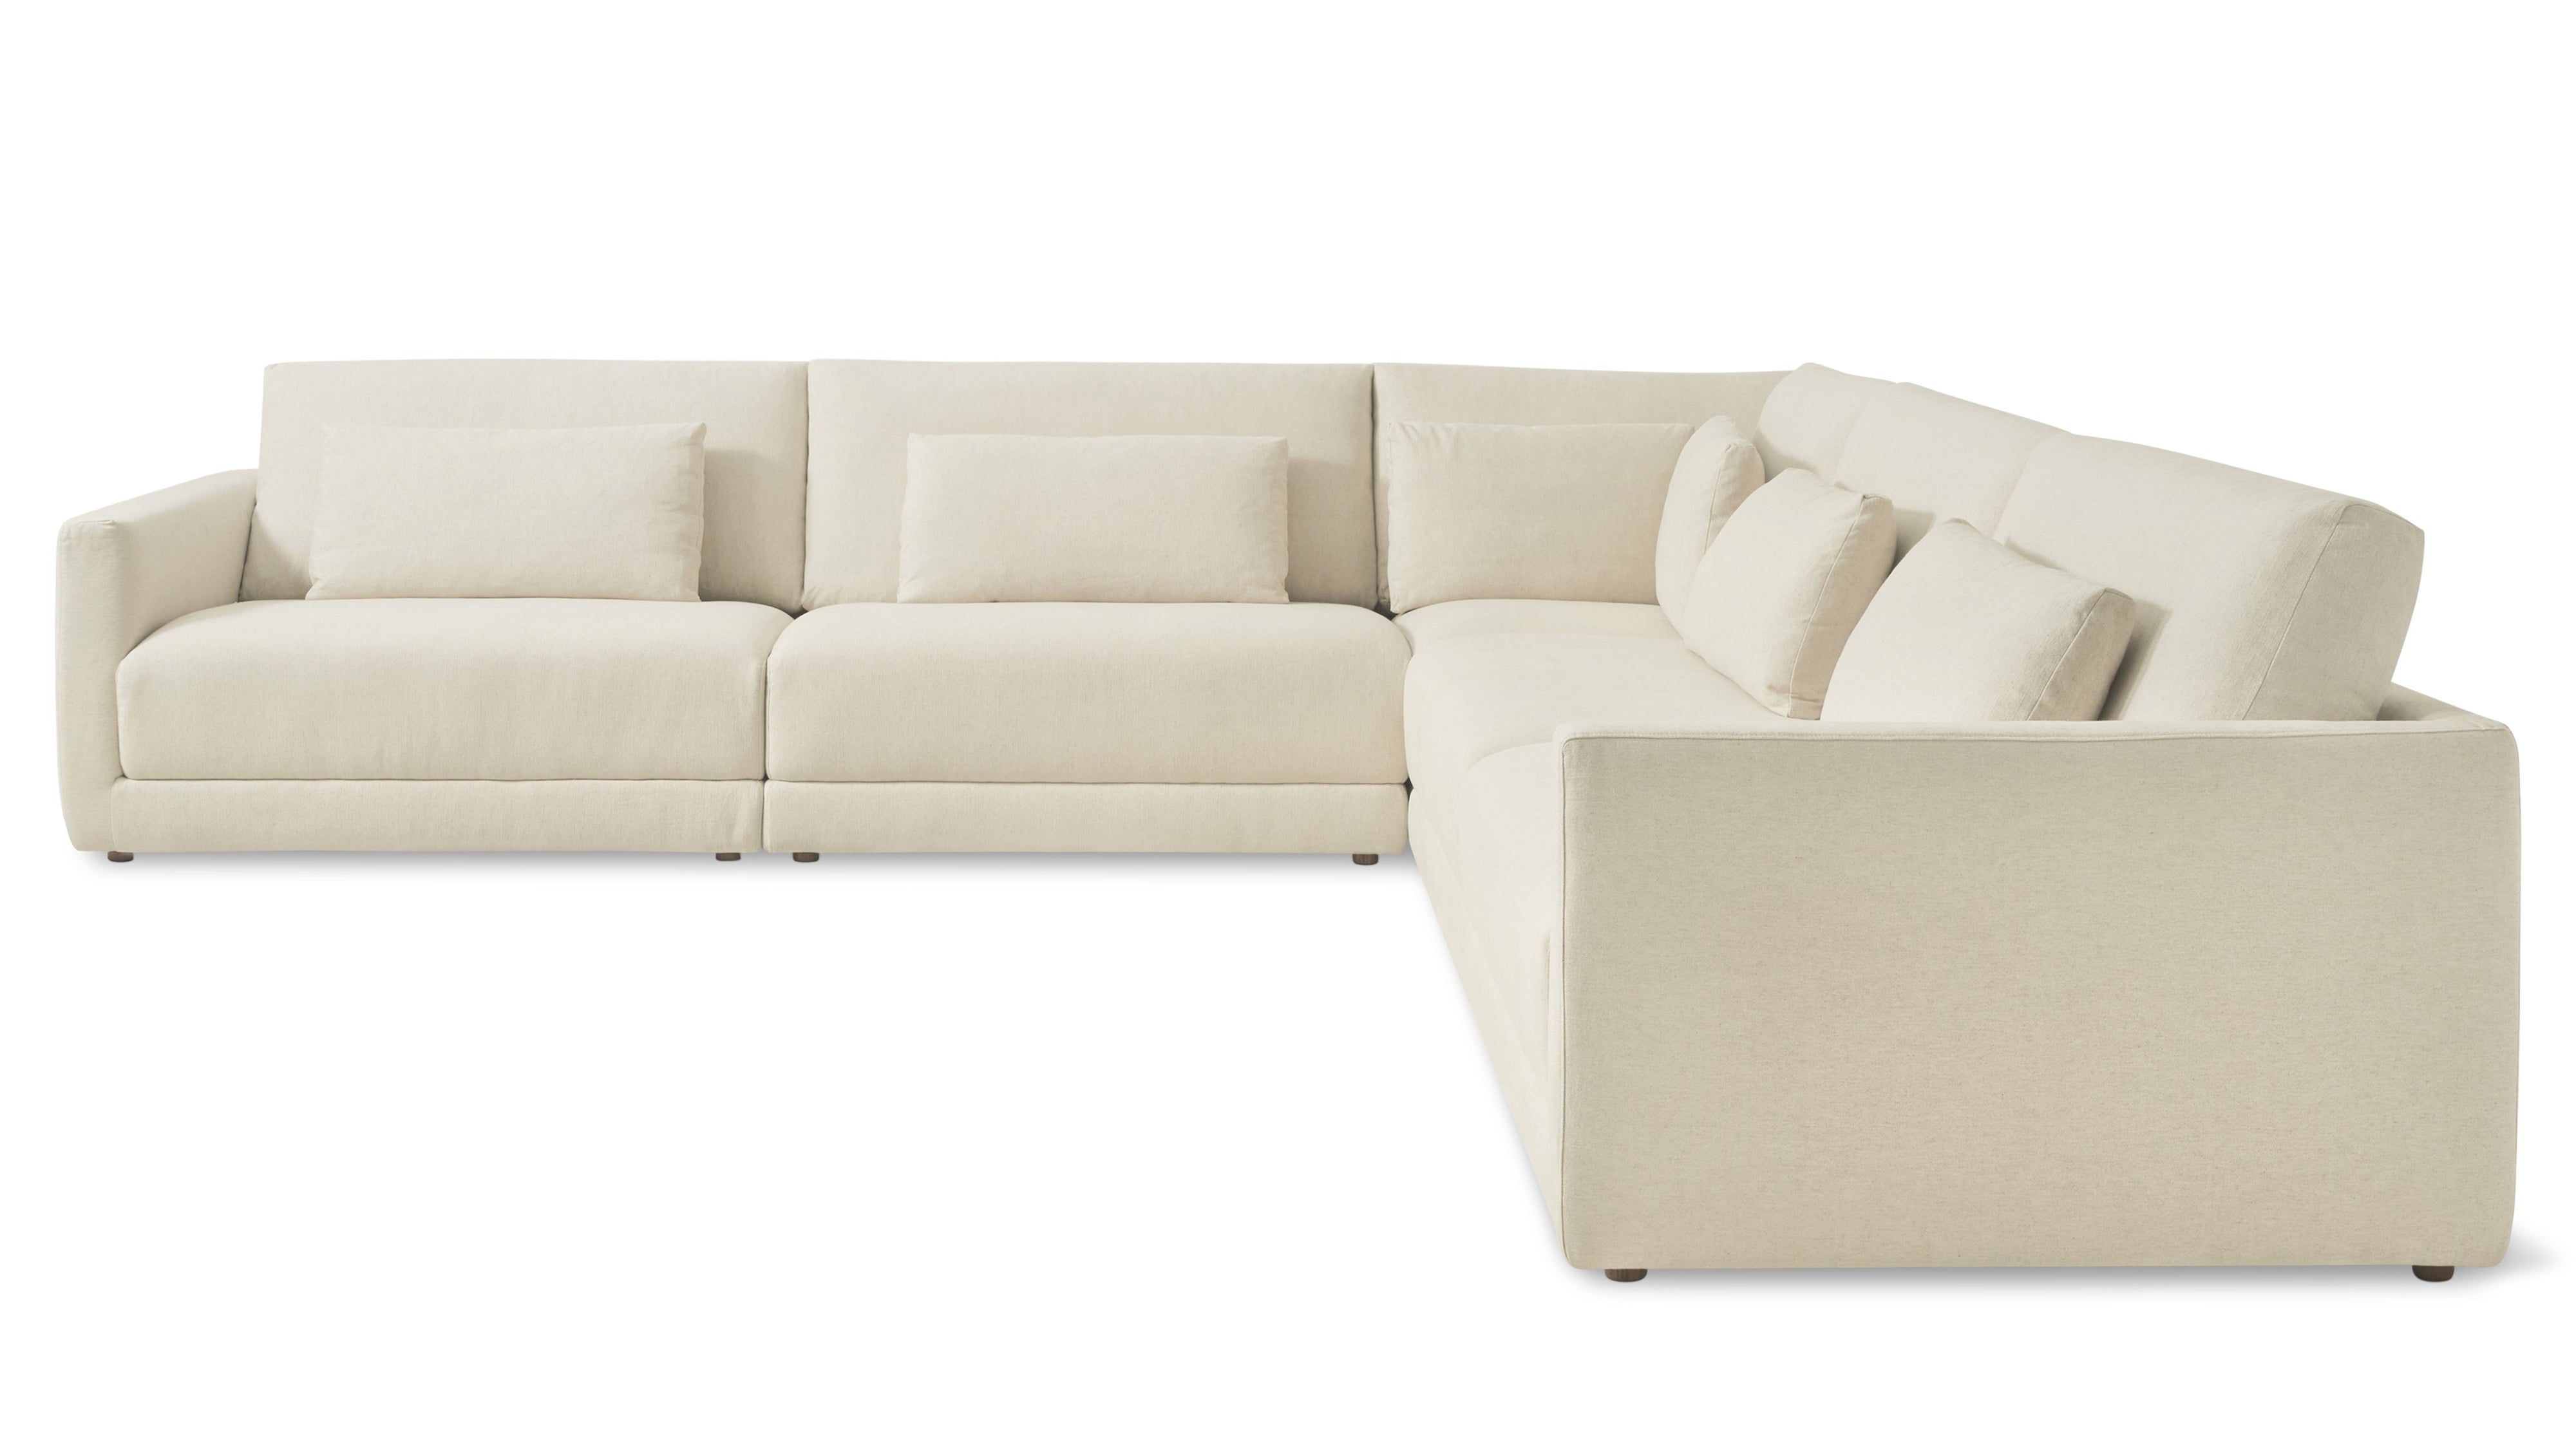 Wind Down 5-Piece Modular Sectional Closed, Beach - Image 1